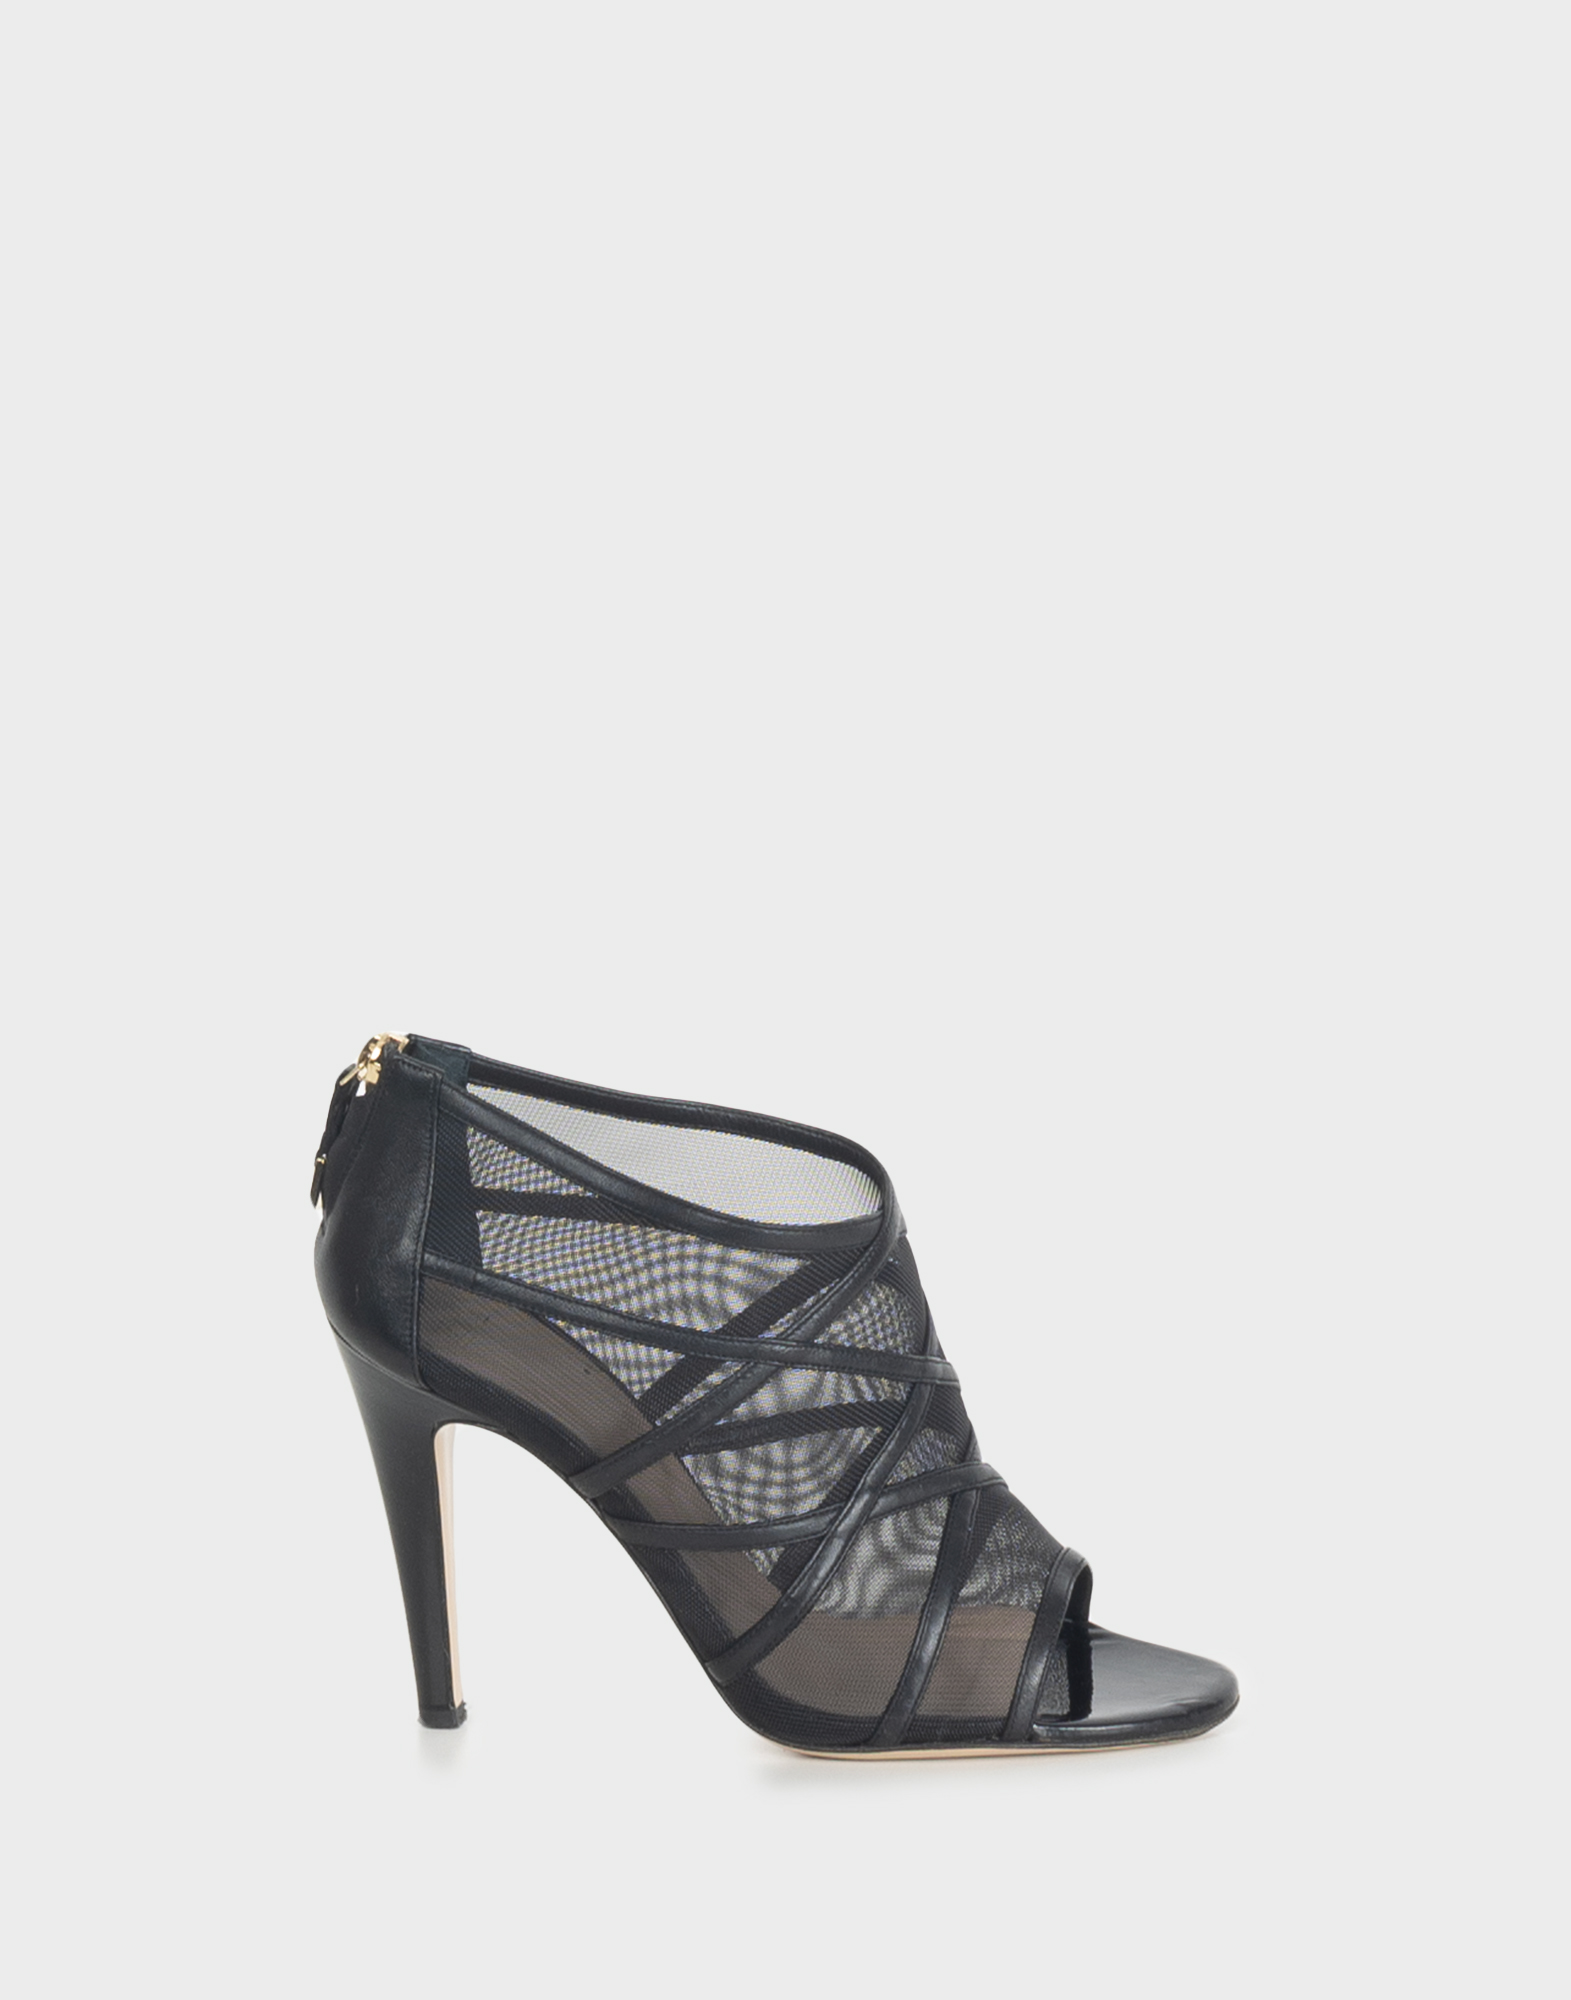 Women's black mesh shoes with a thin leather heel.